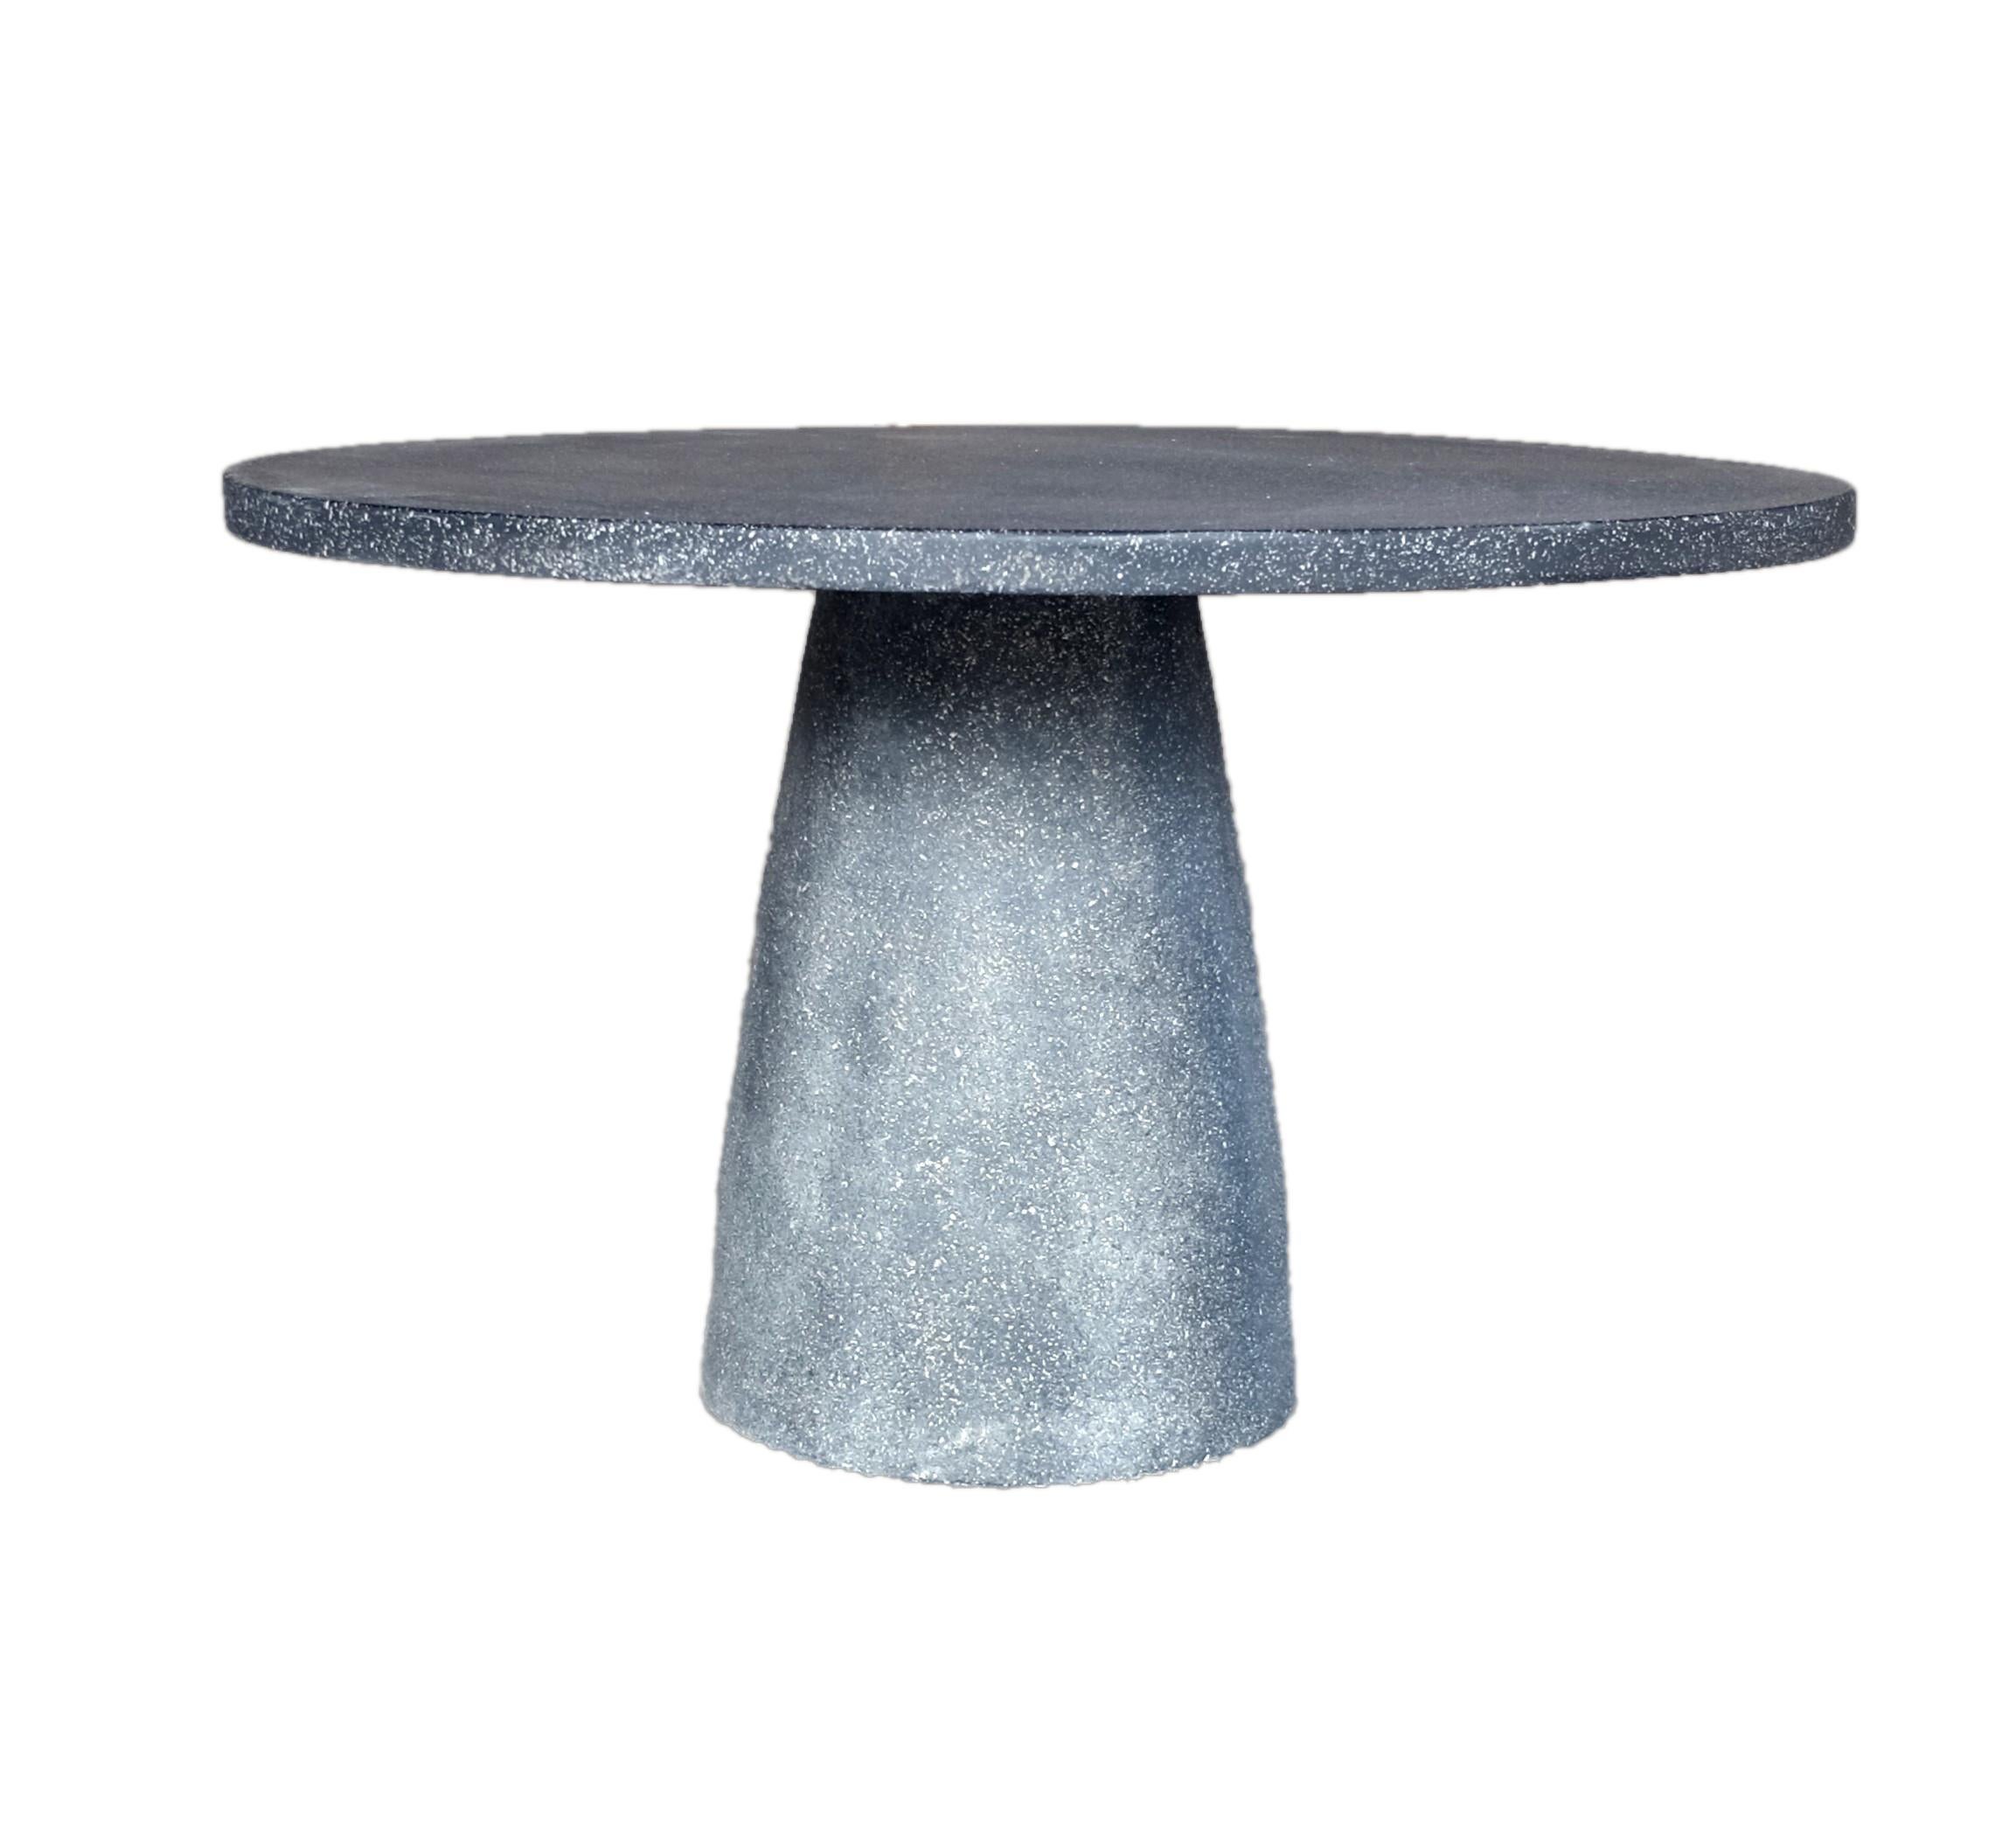 Cast Resin 'Hive' Dining Table, Coal Stone Finish by Zachary A. Design For Sale